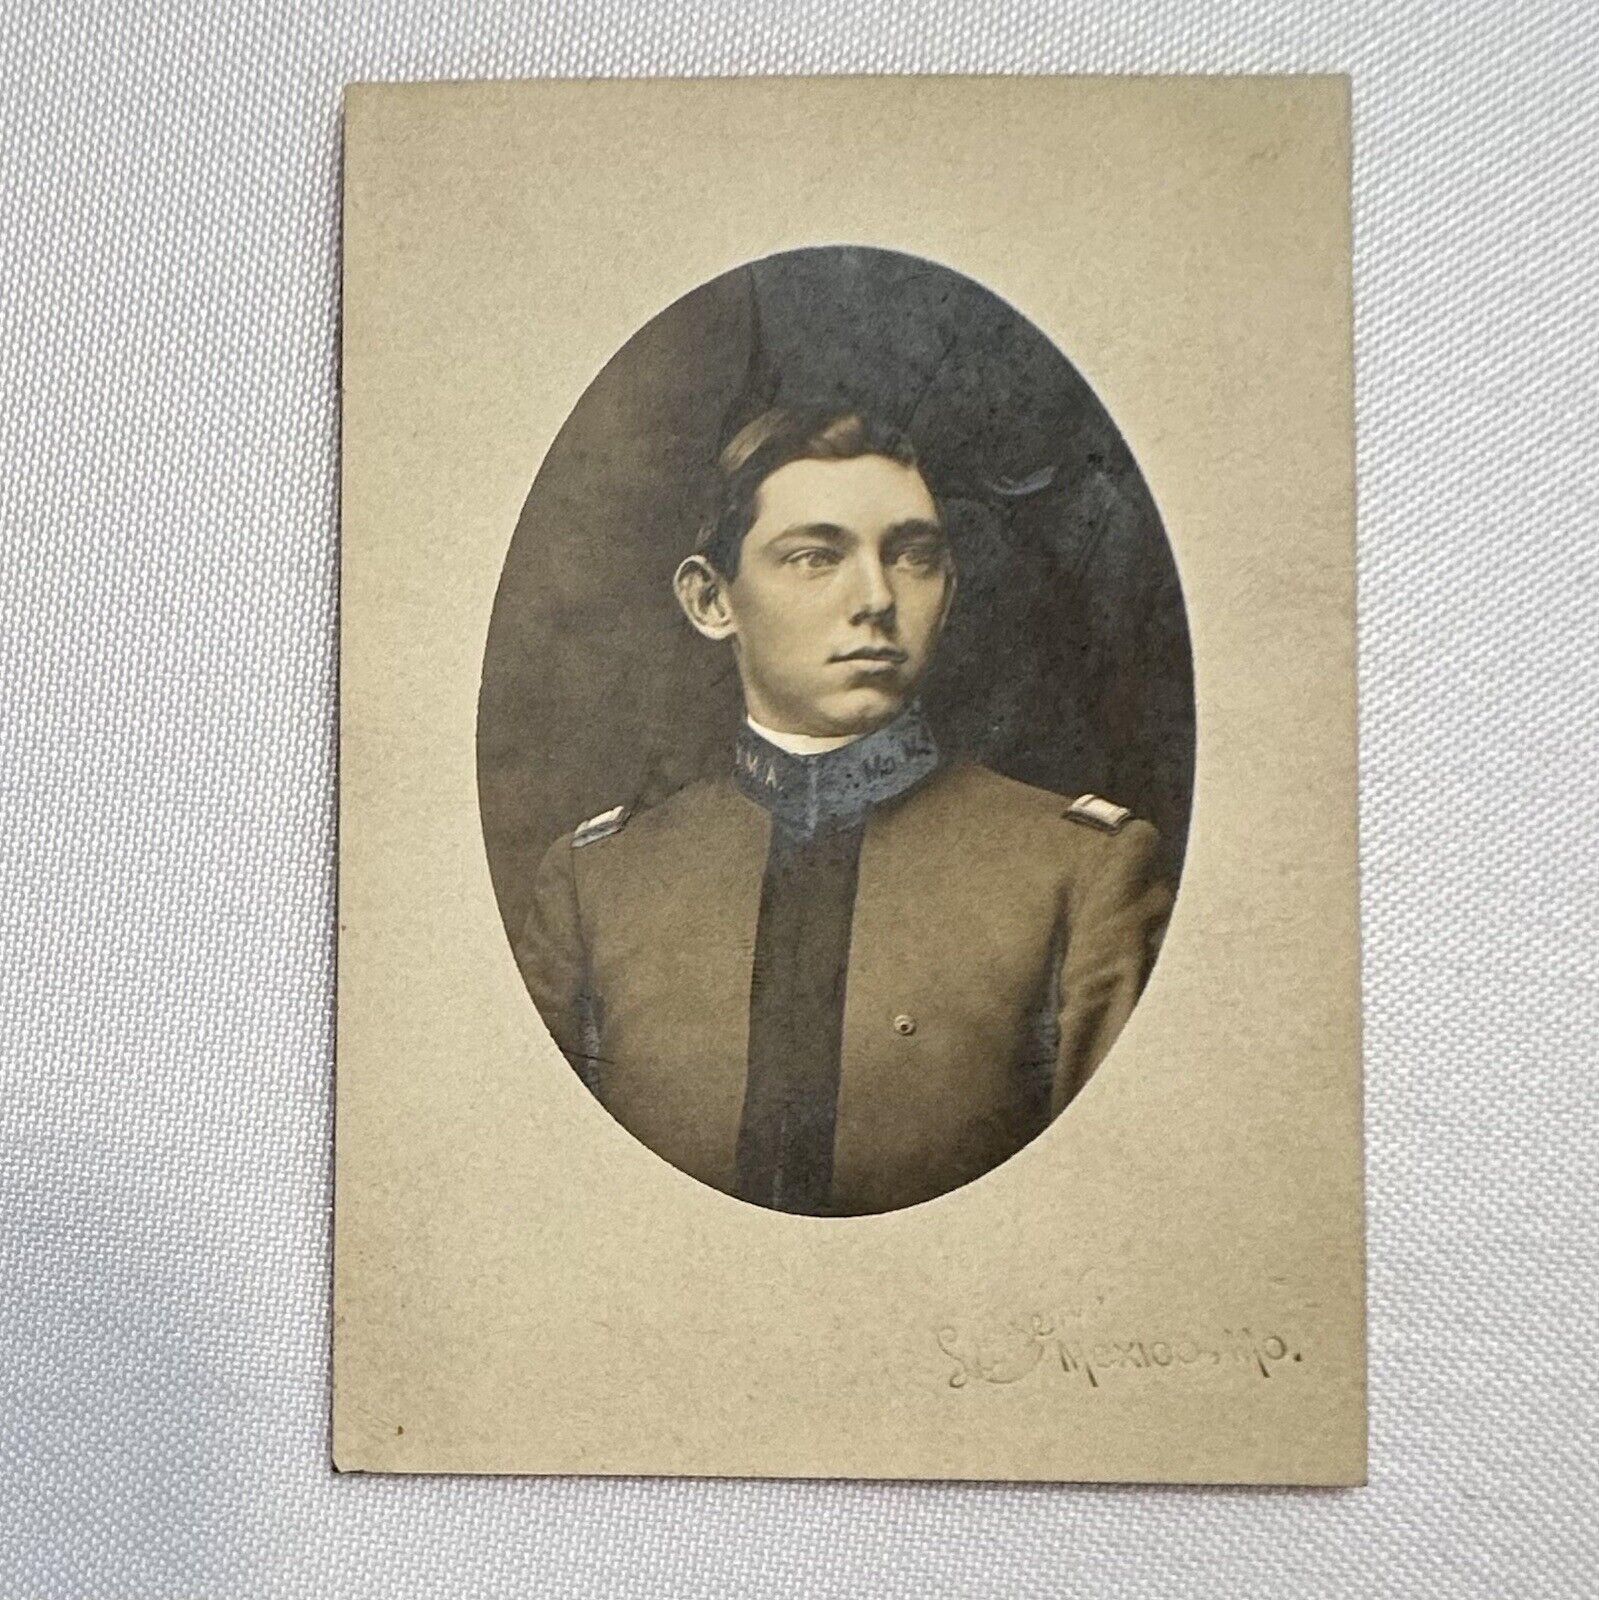 Antique Photograph Black White Handsome Man In A Uniform Late 1800s Mexico MO.